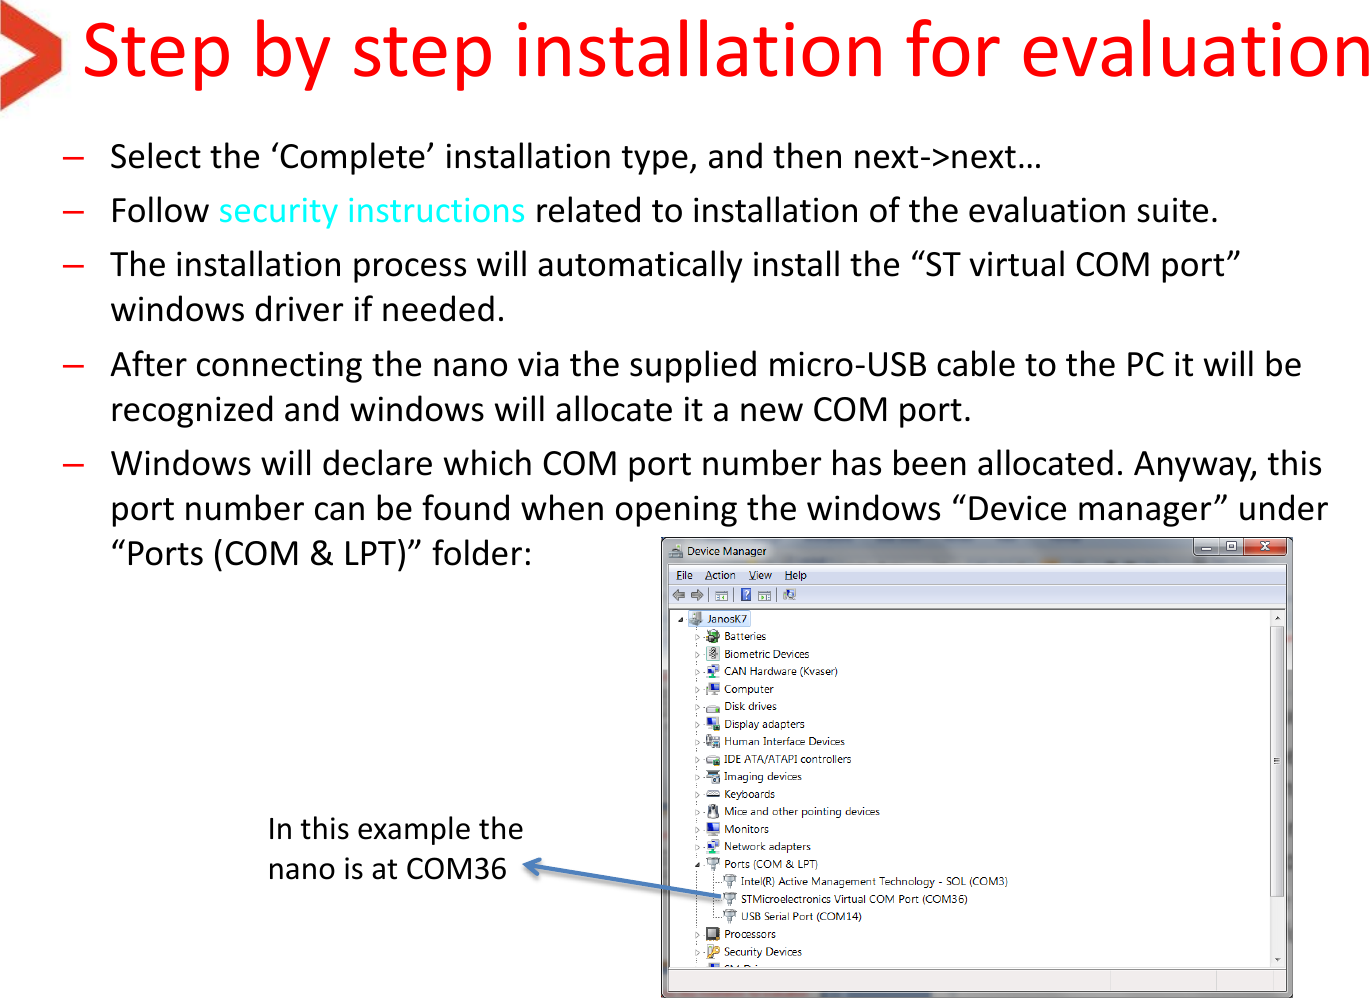 Step by step installation for evaluation –Select the ‘Complete’ installation type, and then next-&gt;next… –Follow security instructions related to installation of the evaluation suite.  –The installation process will automatically install the “ST virtual COM port” windows driver if needed. –After connecting the nano via the supplied micro-USB cable to the PC it will be recognized and windows will allocate it a new COM port. –Windows will declare which COM port number has been allocated. Anyway, this port number can be found when opening the windows “Device manager” under “Ports (COM &amp; LPT)” folder:   In this example the nano is at COM36 